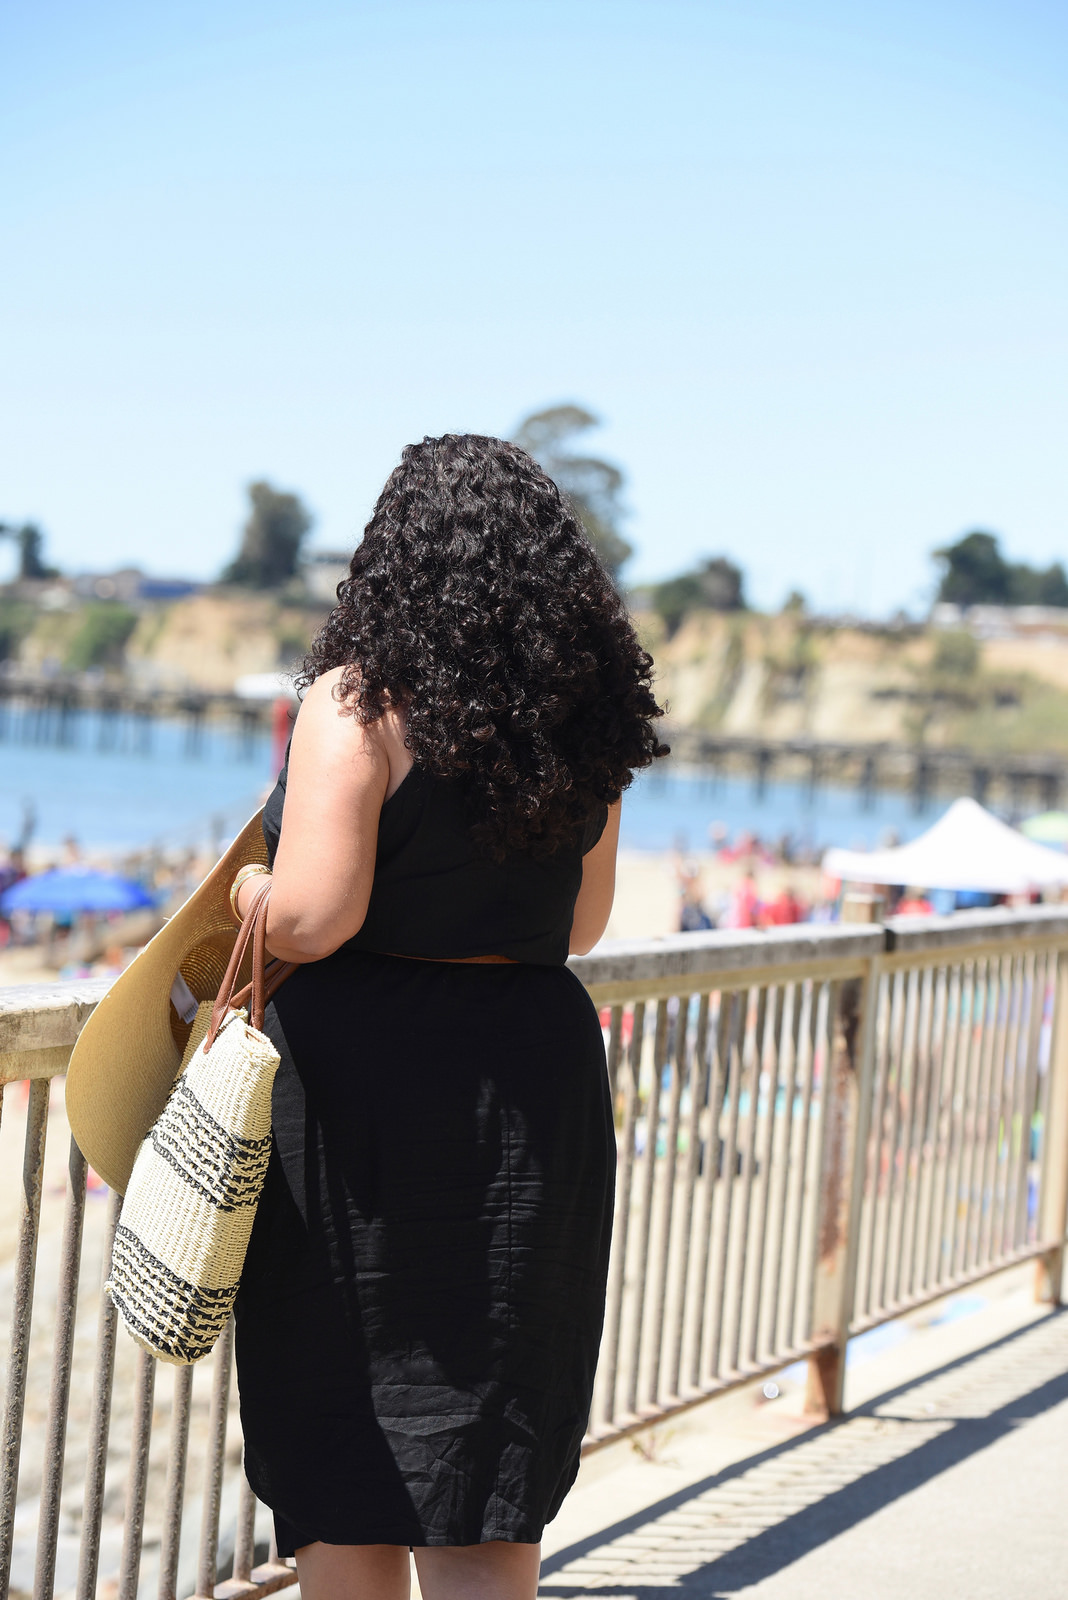 Tanesha Awasthi (formerly known as Girl With Curves) wearing a black shirtdress in Capitola.